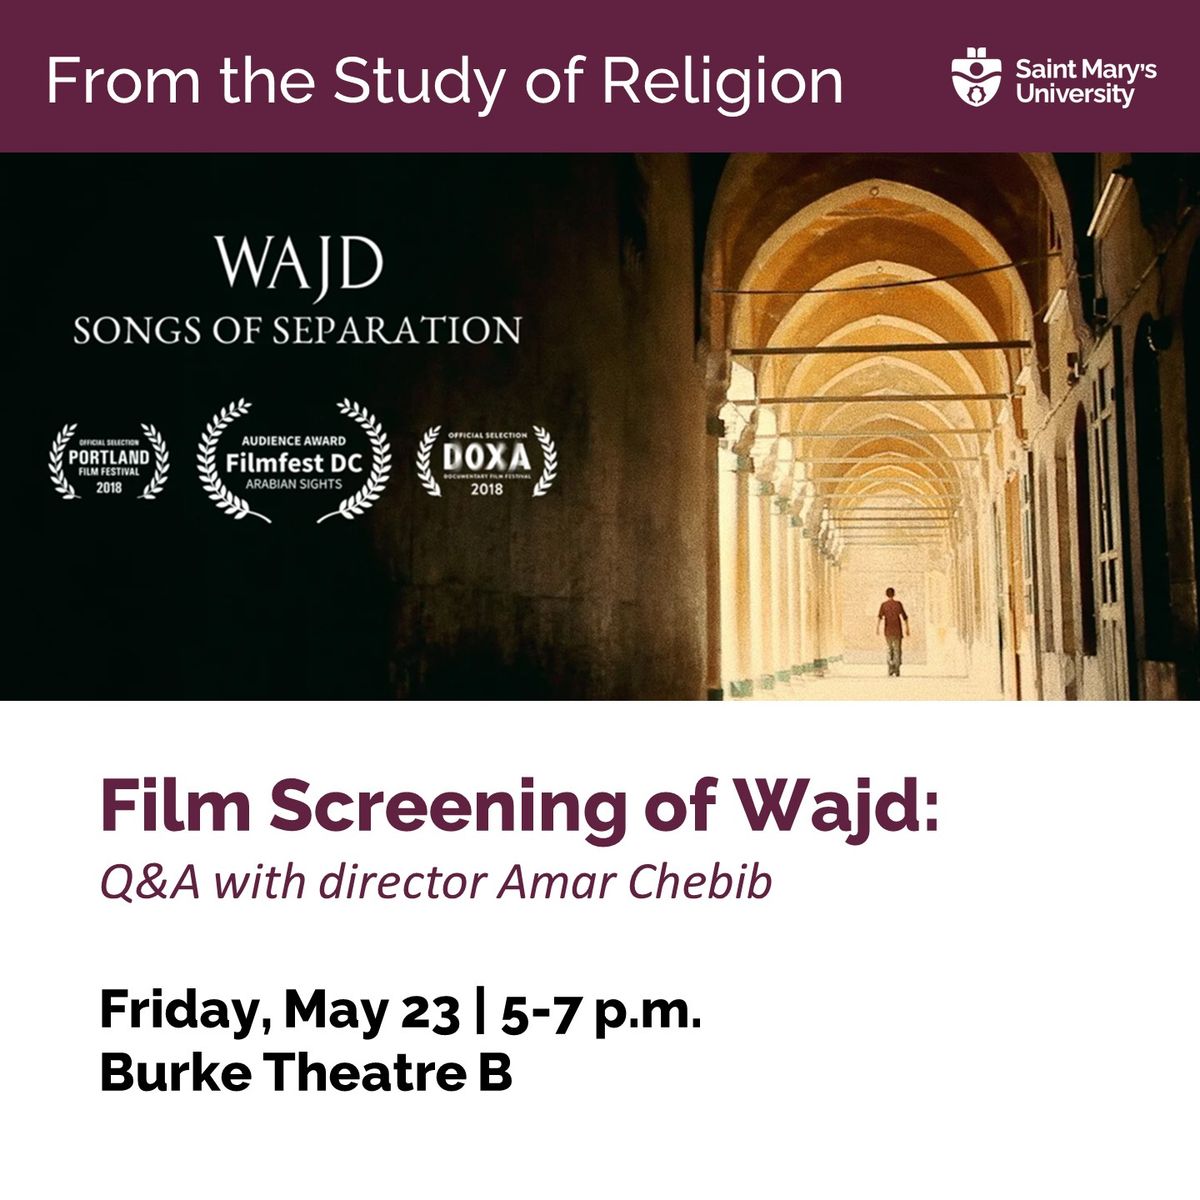 Film Screening and Director Q&A - Wajd: Songs of Separation